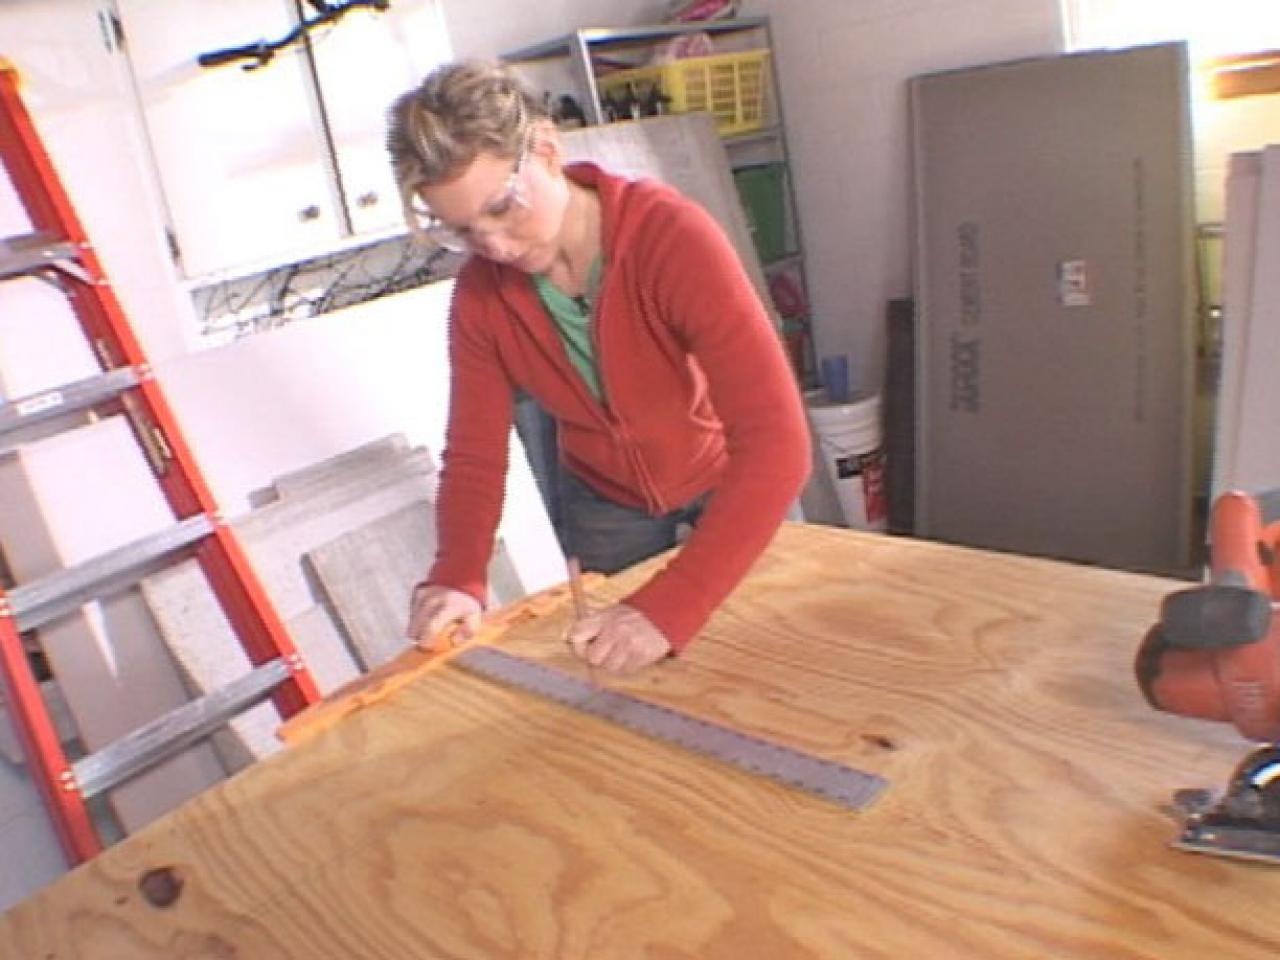 How to Lay a Subfloor | how-tos | DIY